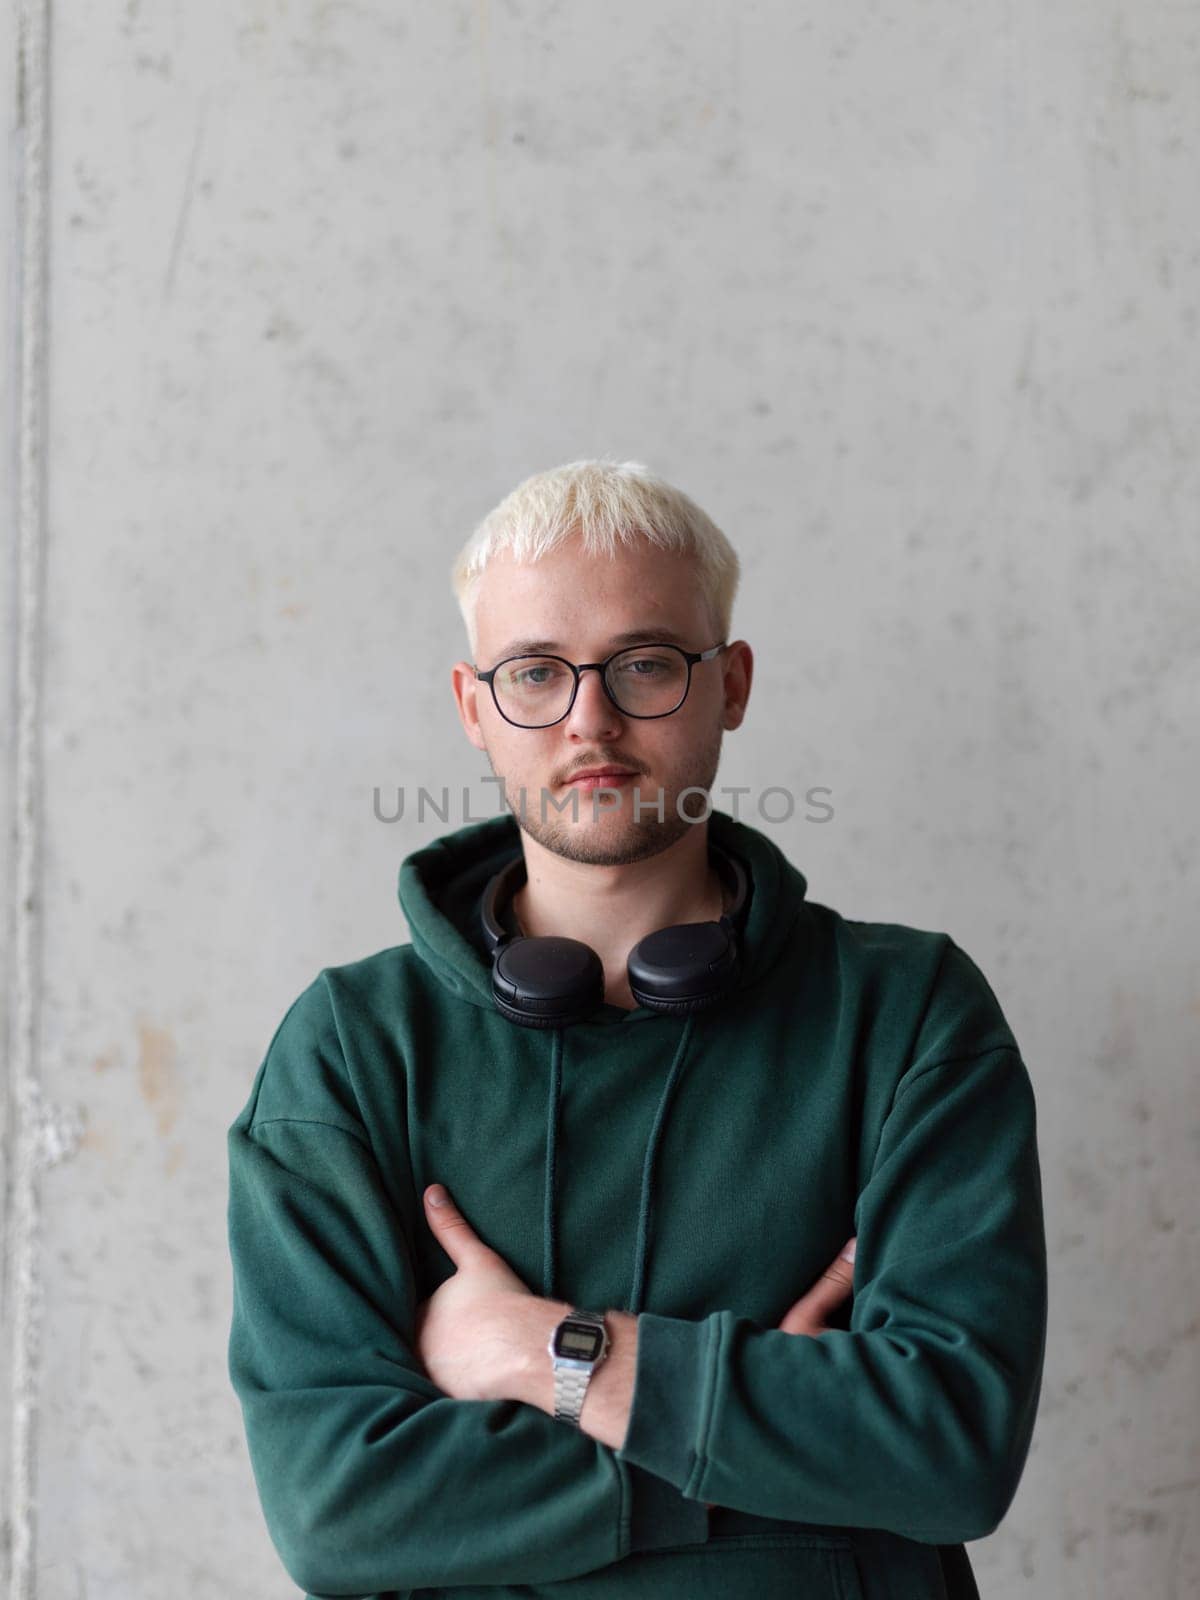 A man with blue hair, eyeglasses, and a green sweatshirt confidently poses with his arms crossed against a gray background, showcasing his fashionable and unique style. by dotshock